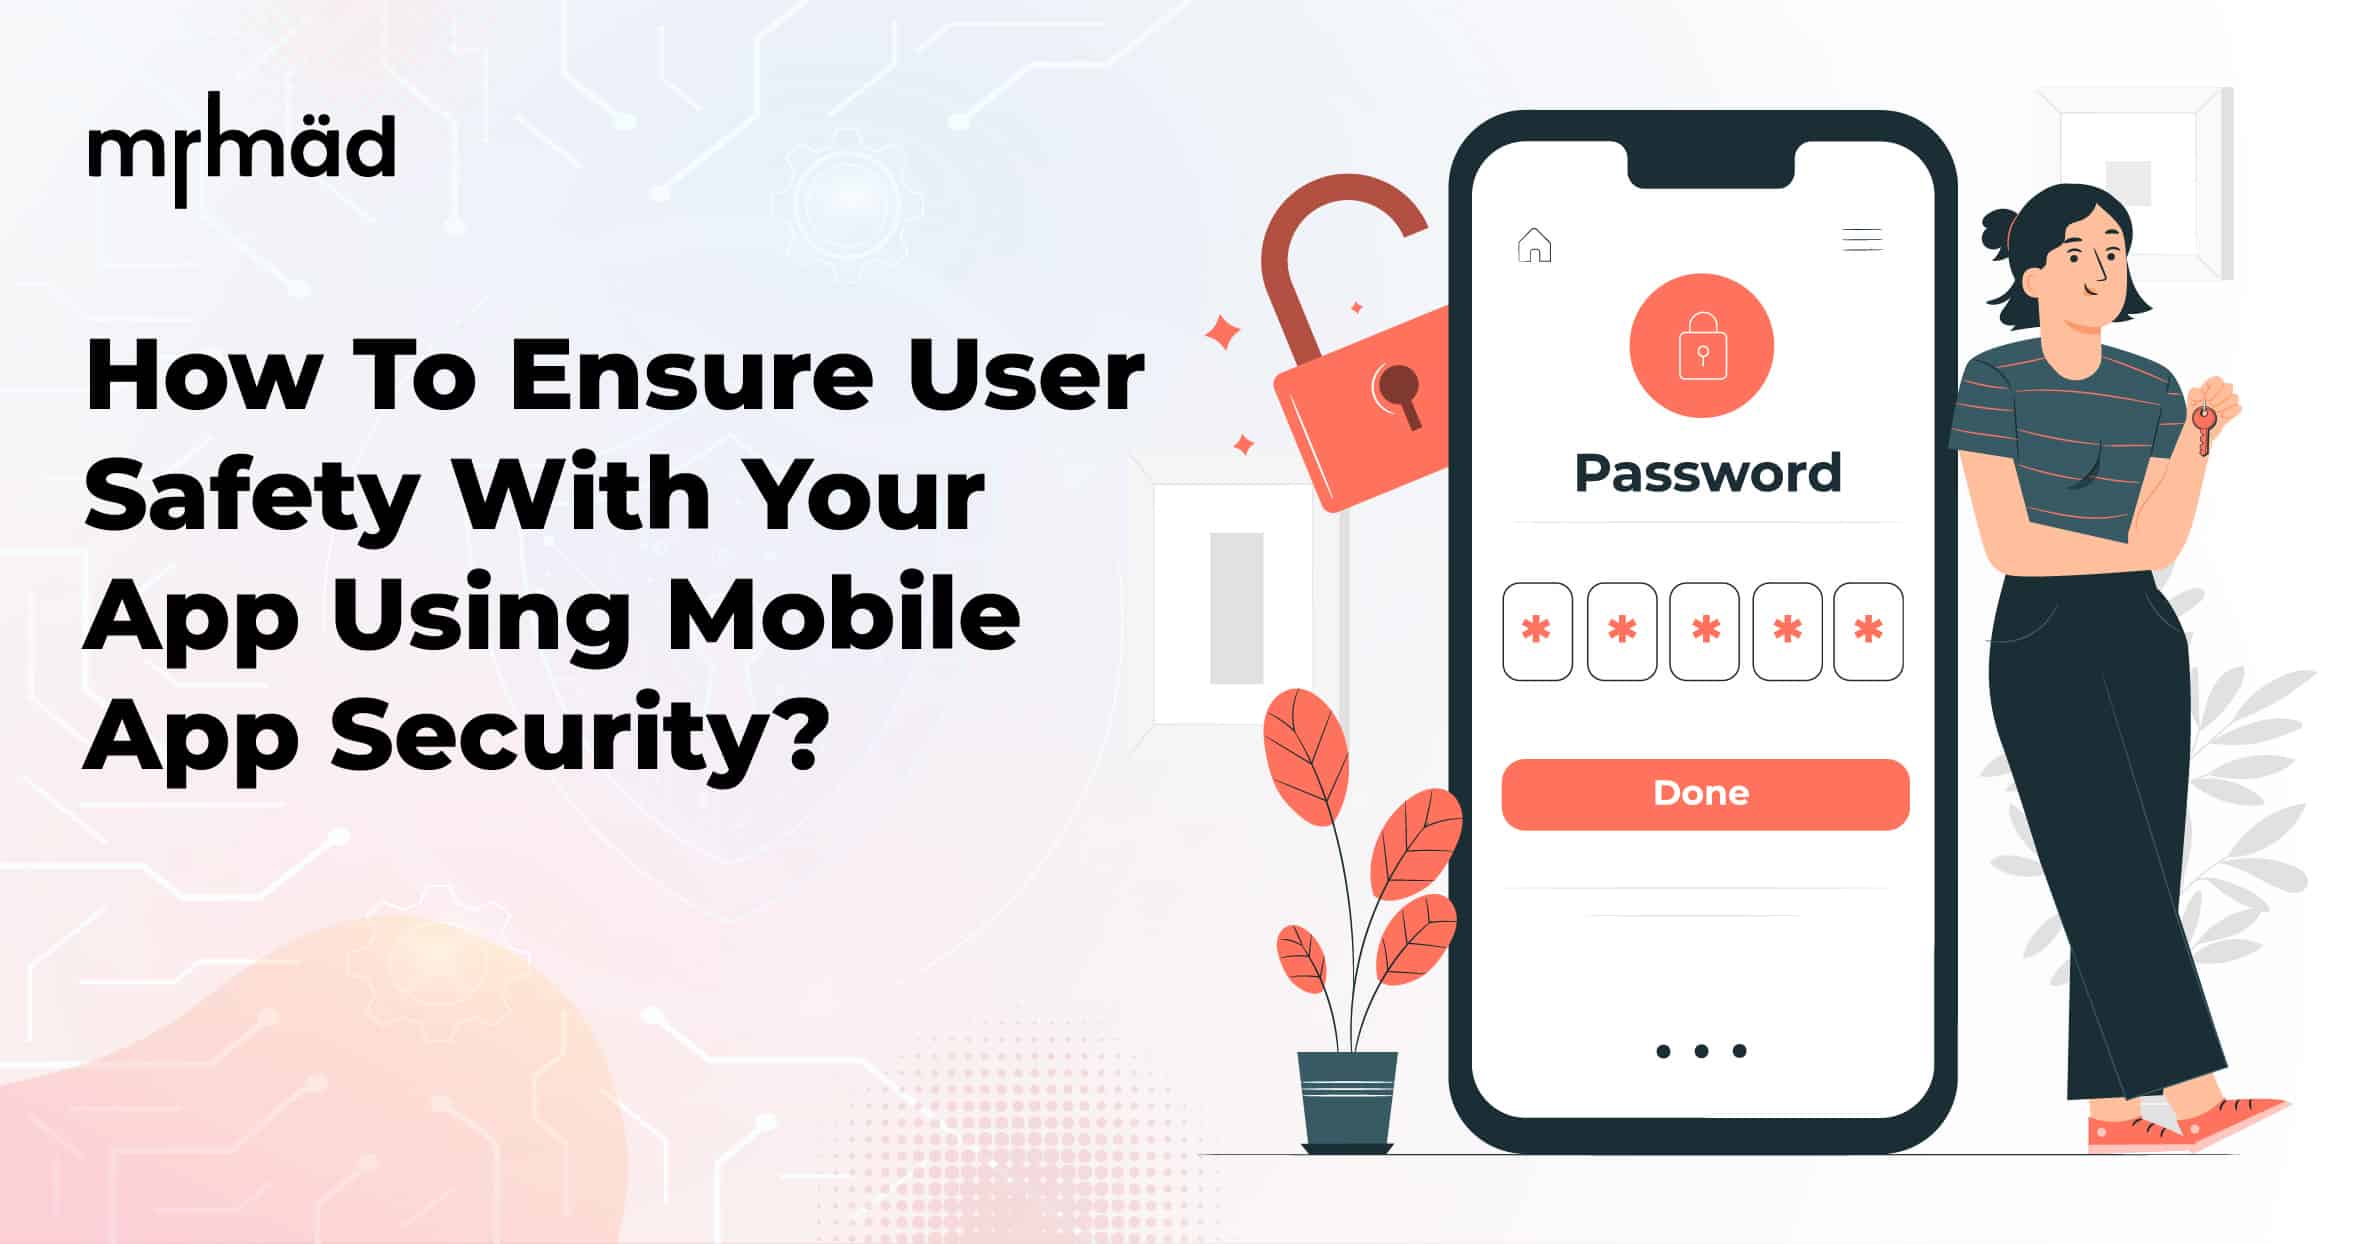 How To Ensure User Safety With Your App Using Mobile App Security